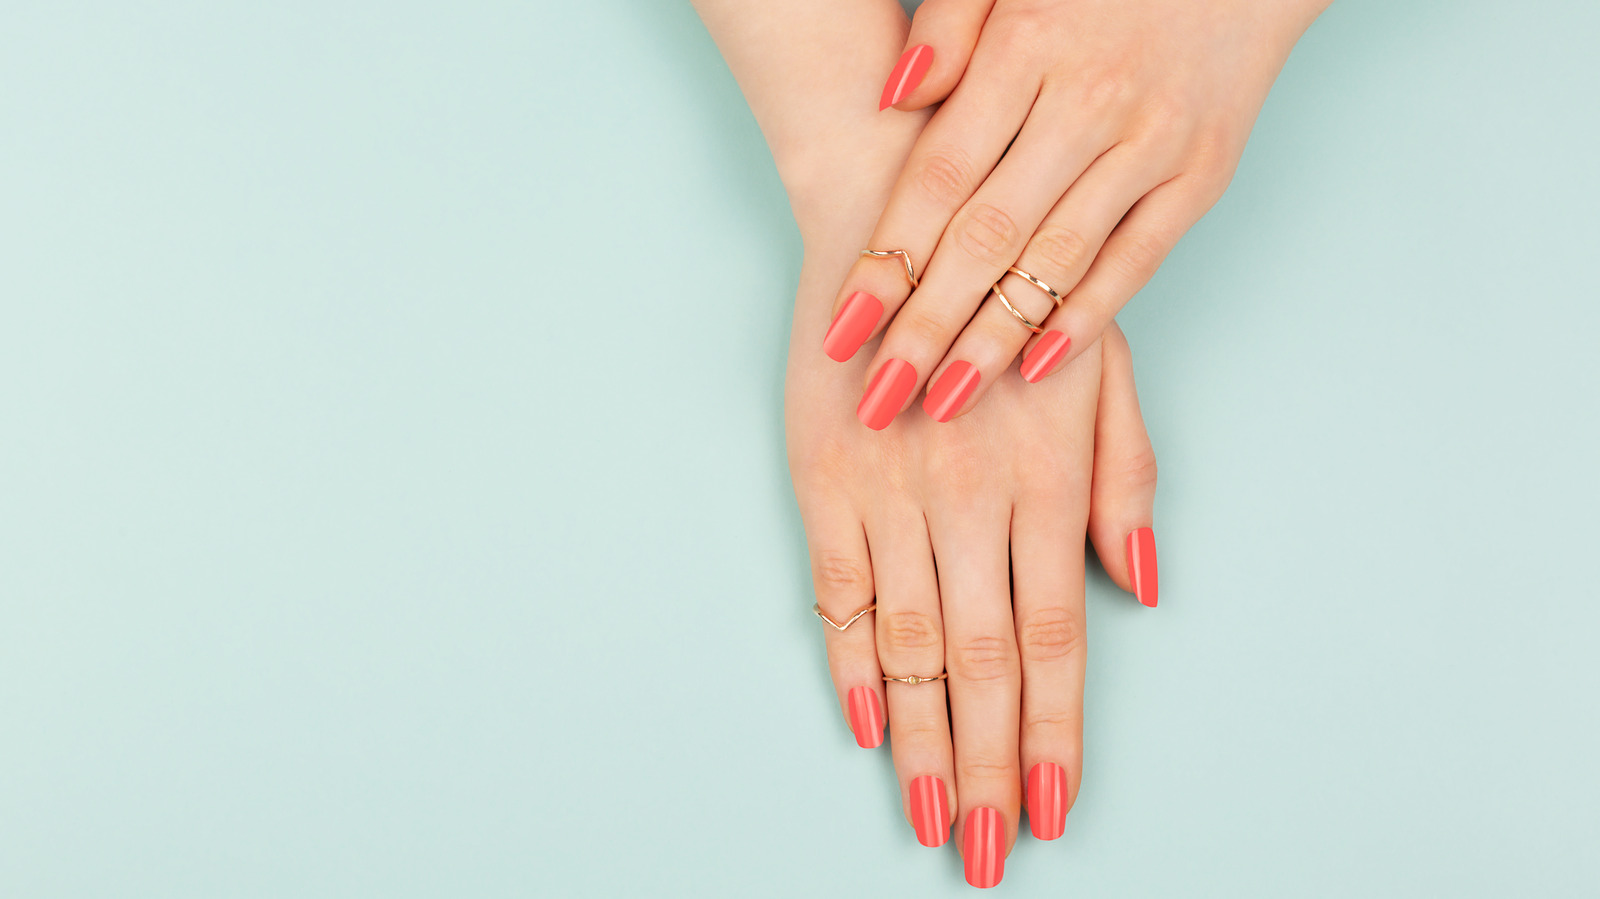 3. Best coral nail polish shades for a coral dress - wide 4